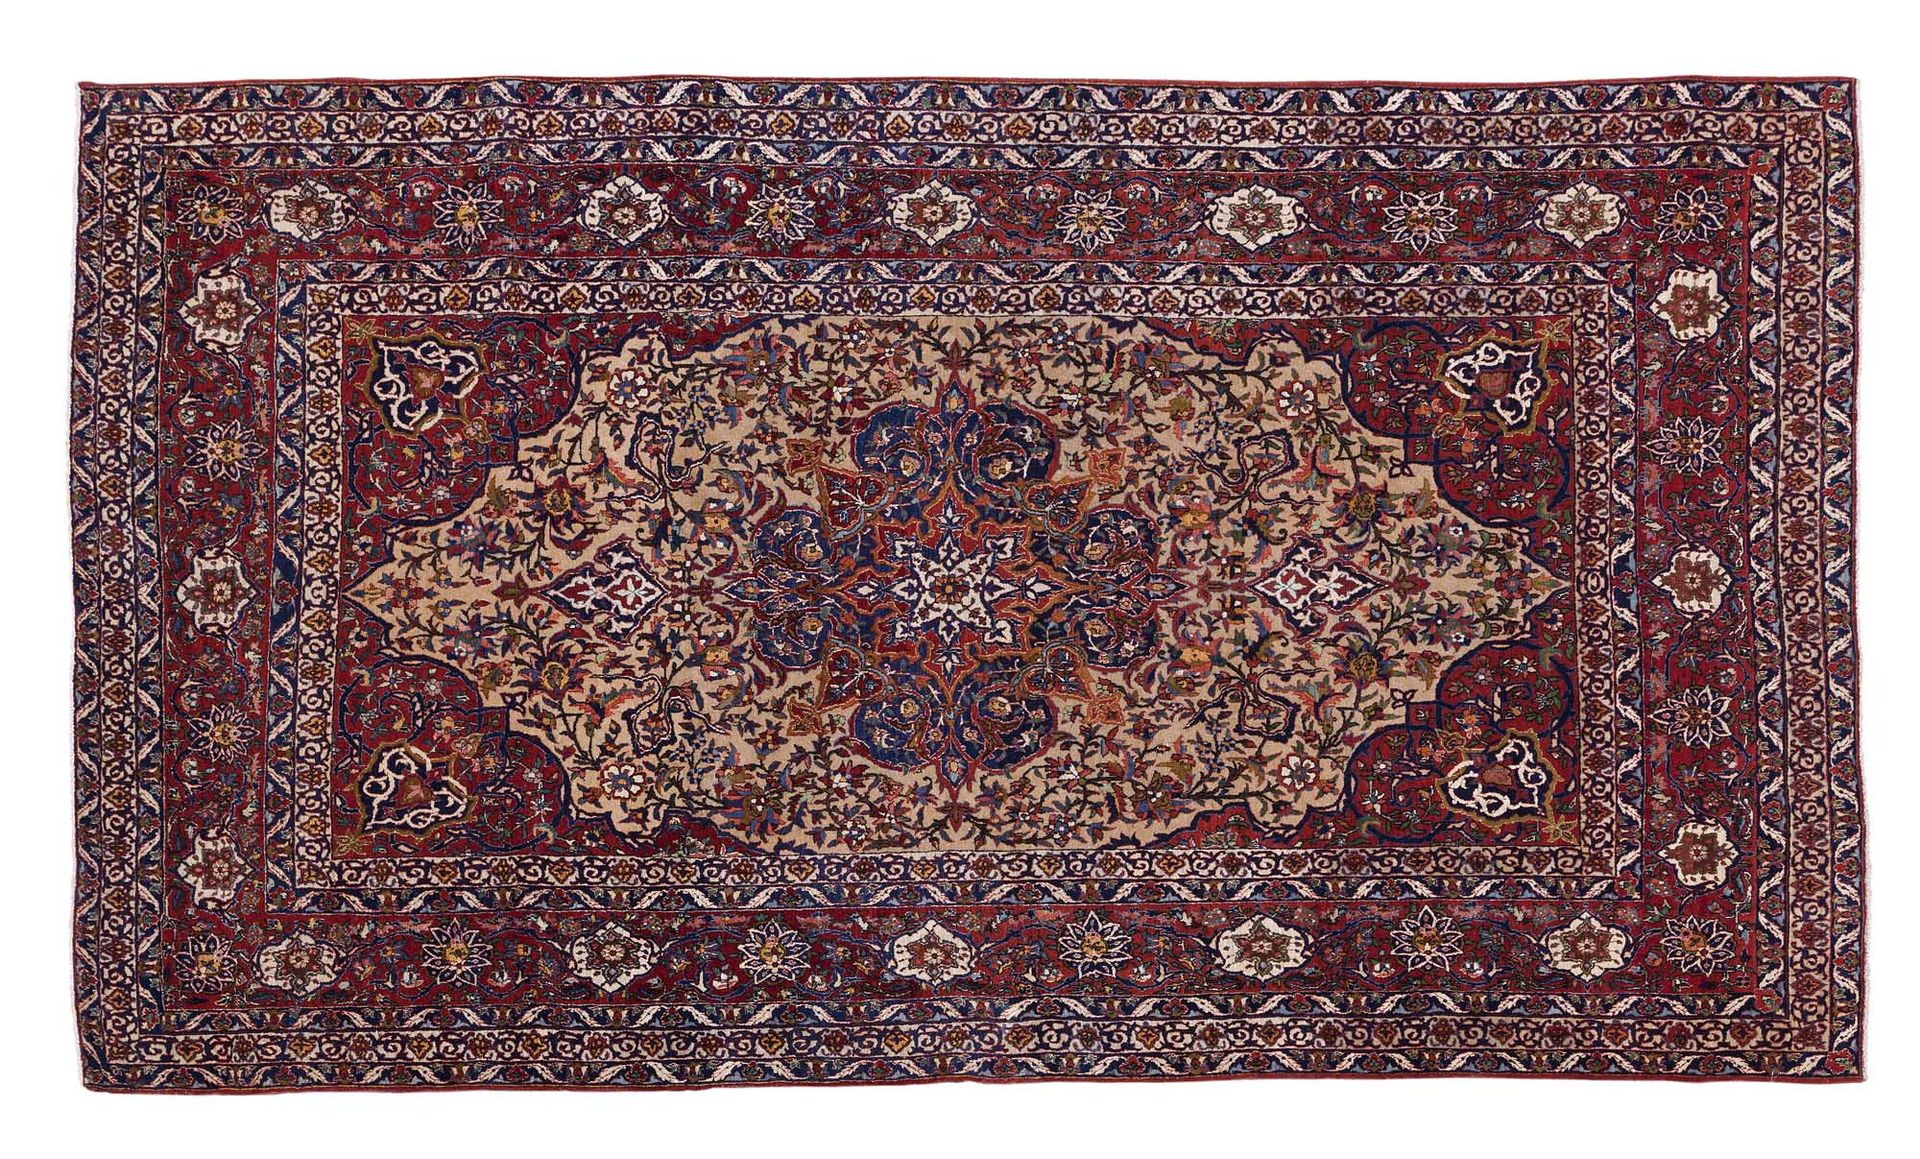 Null ISPAHAN carpet (Persia), early 20th century

Dimensions : 240 x 151cm

Tech&hellip;